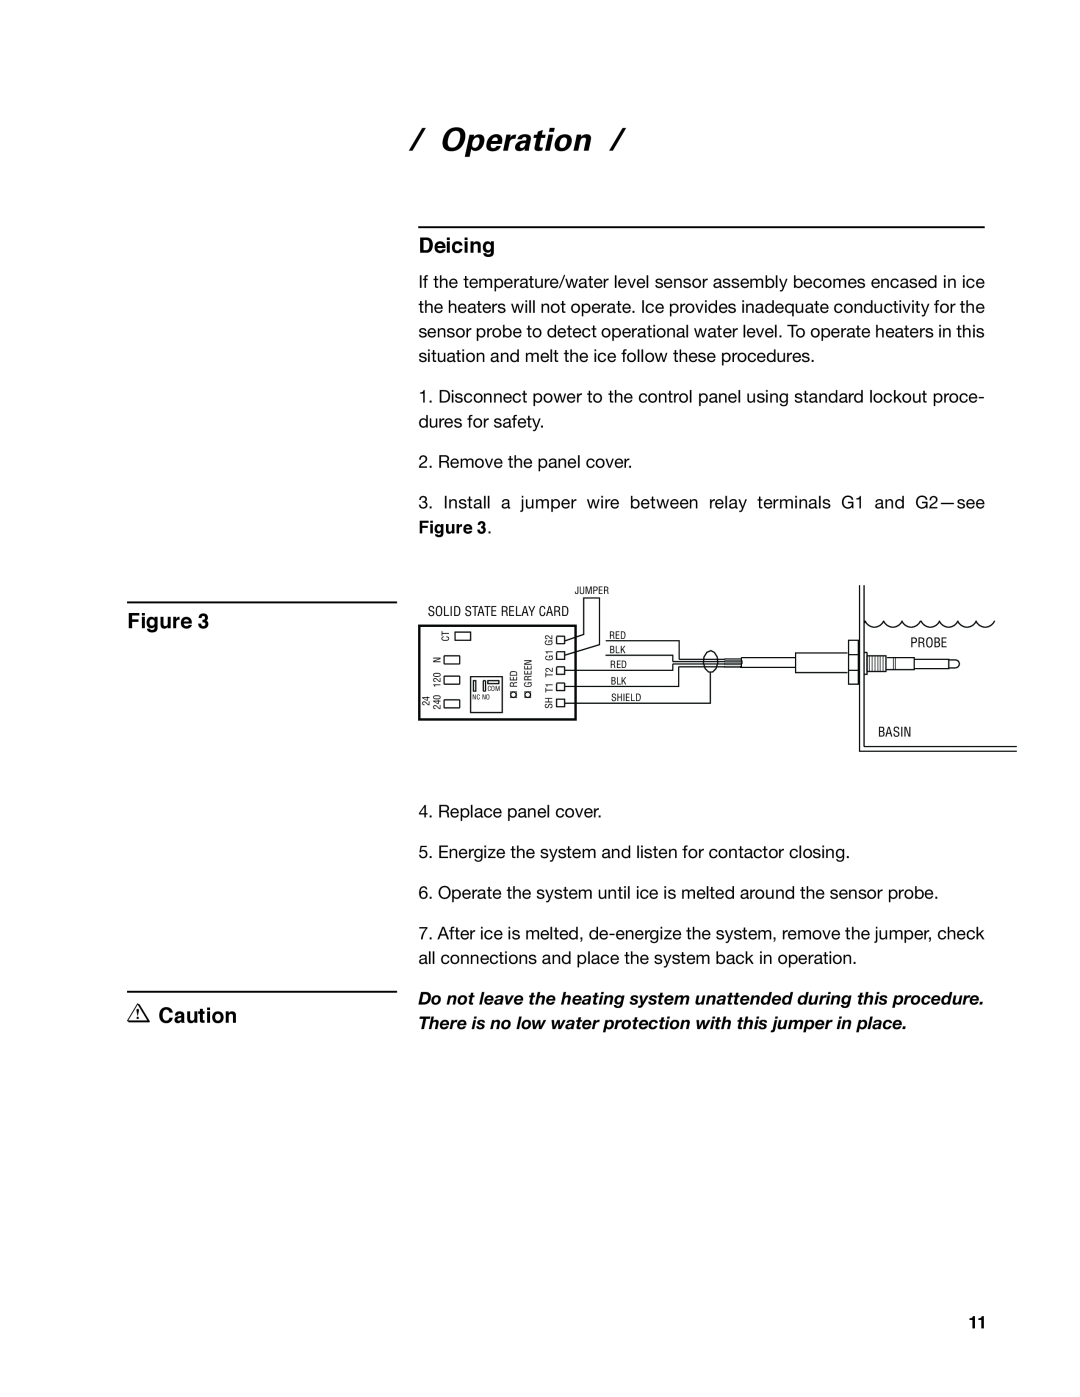 SPX Cooling Technologies 92-1322C user manual Deicing, Operation, Probe Basin 